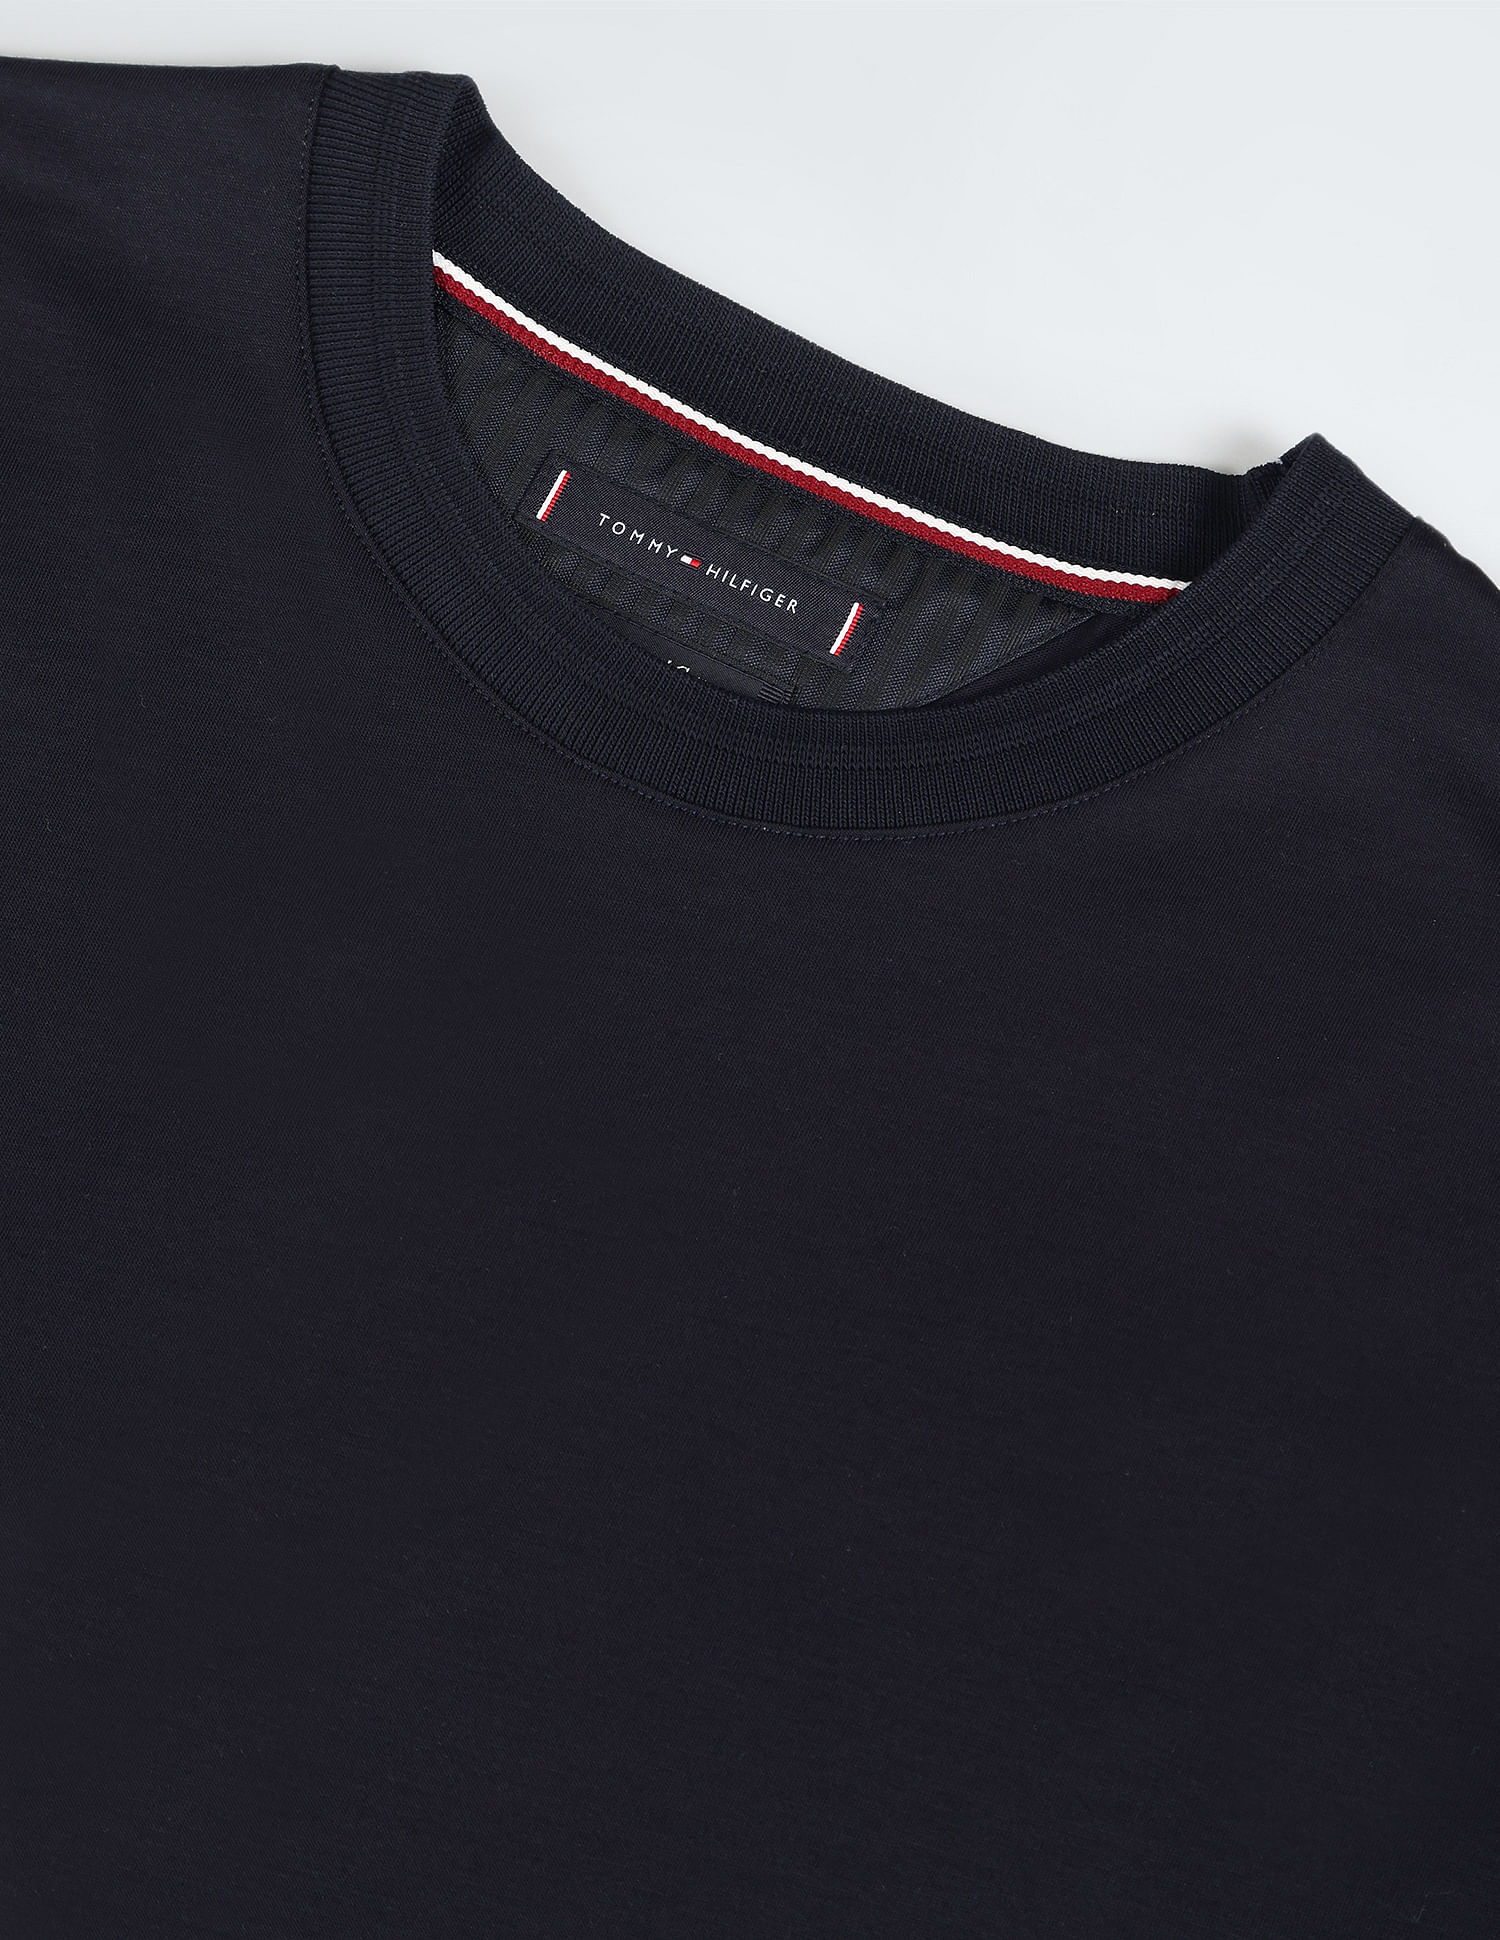 Buy Tommy Hilfiger Solid Mercerized Cotton T-Shirt - NNNOW.com